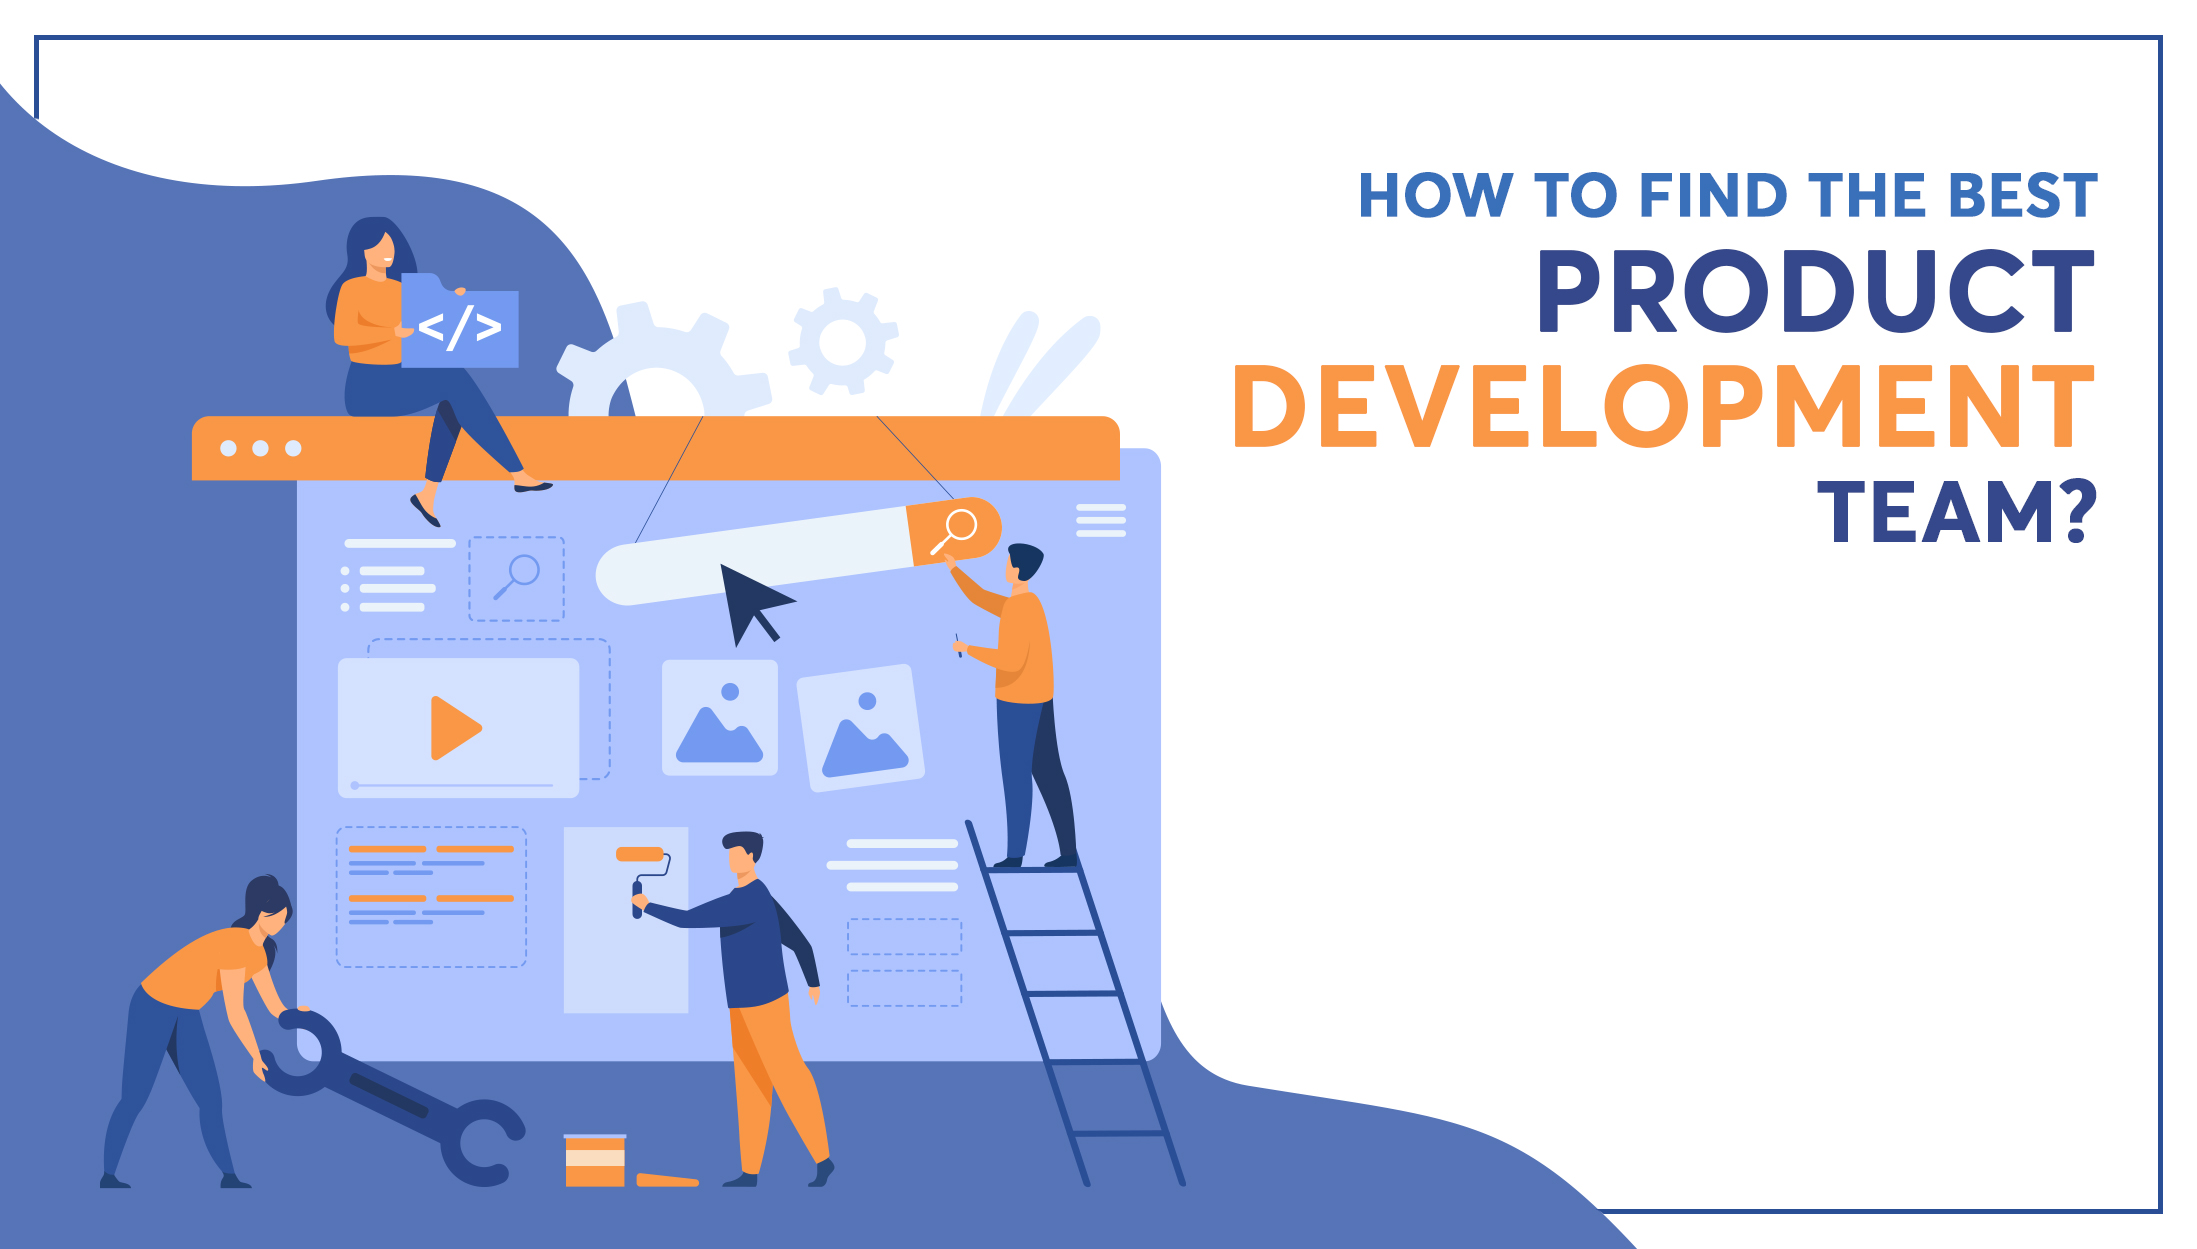 How to find the best product development team?